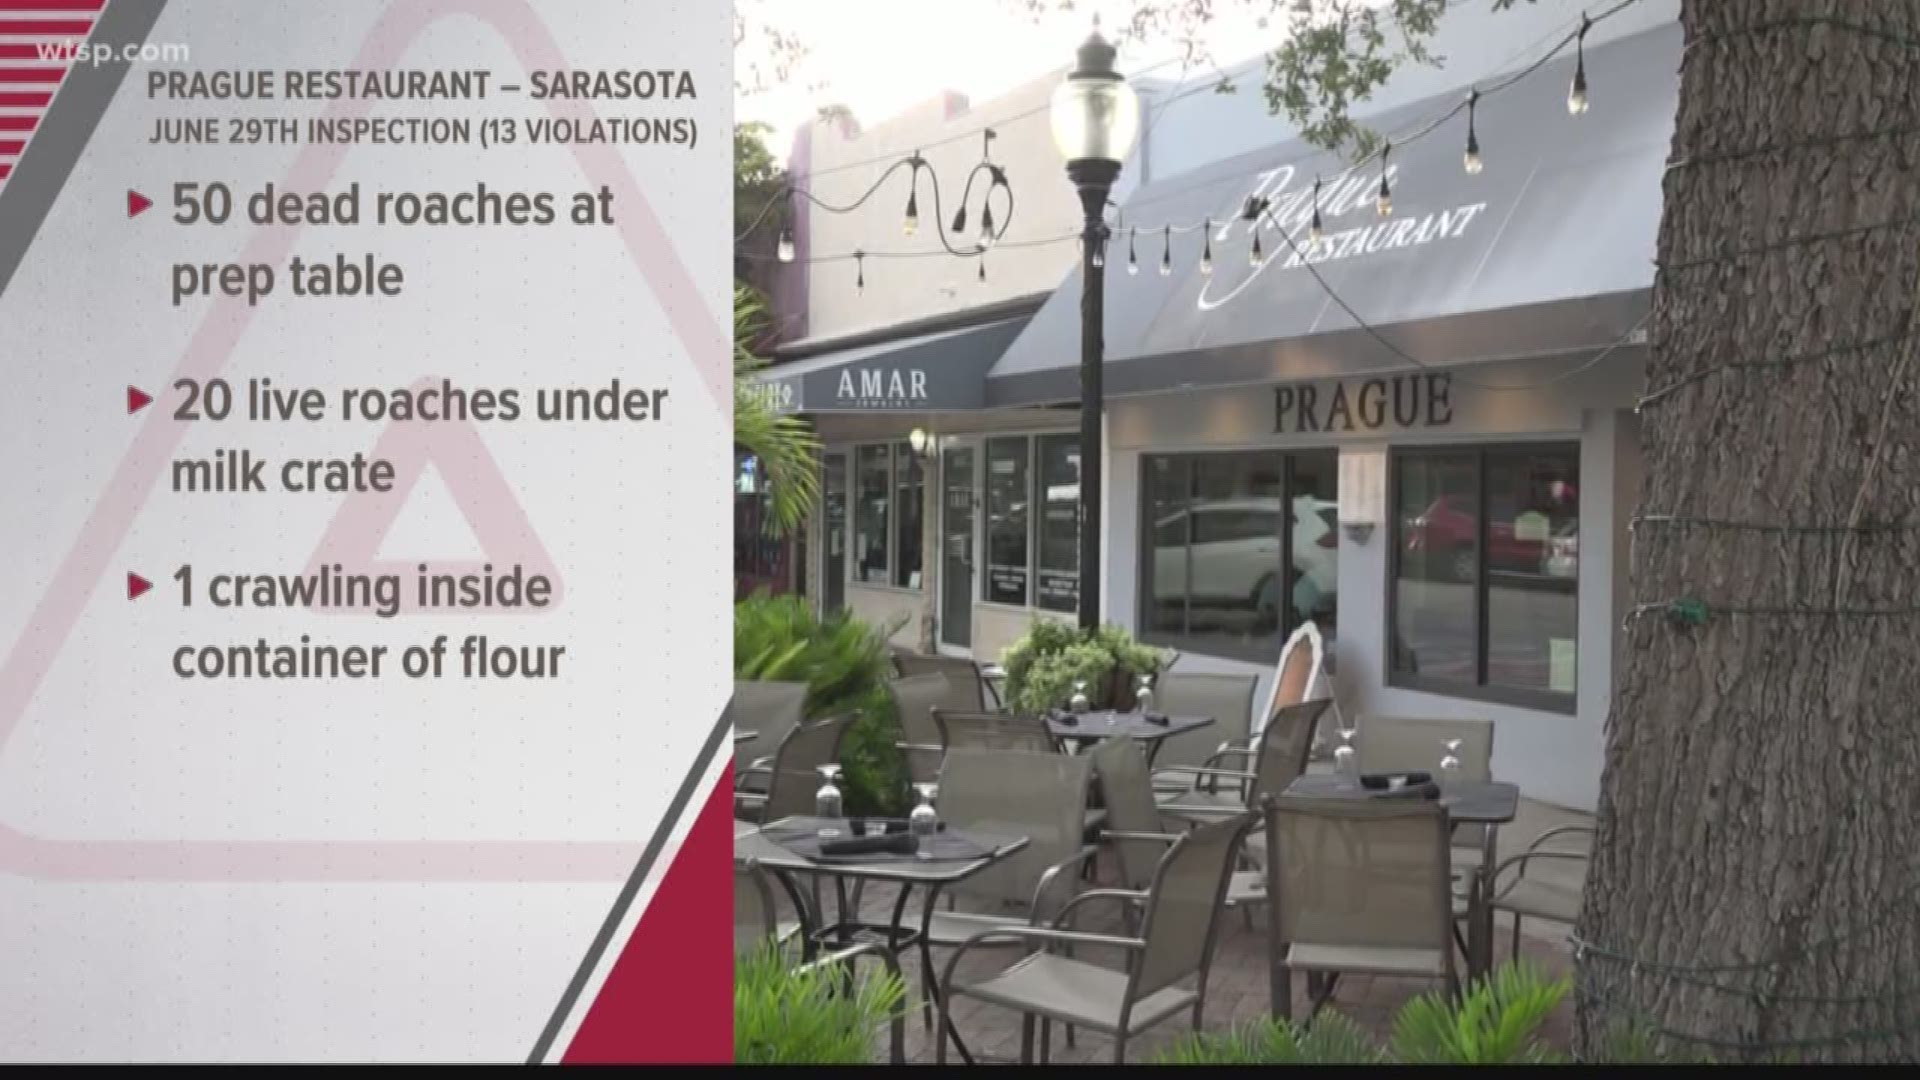 Problems with roaches temporarily shut down 3 different restaurants.